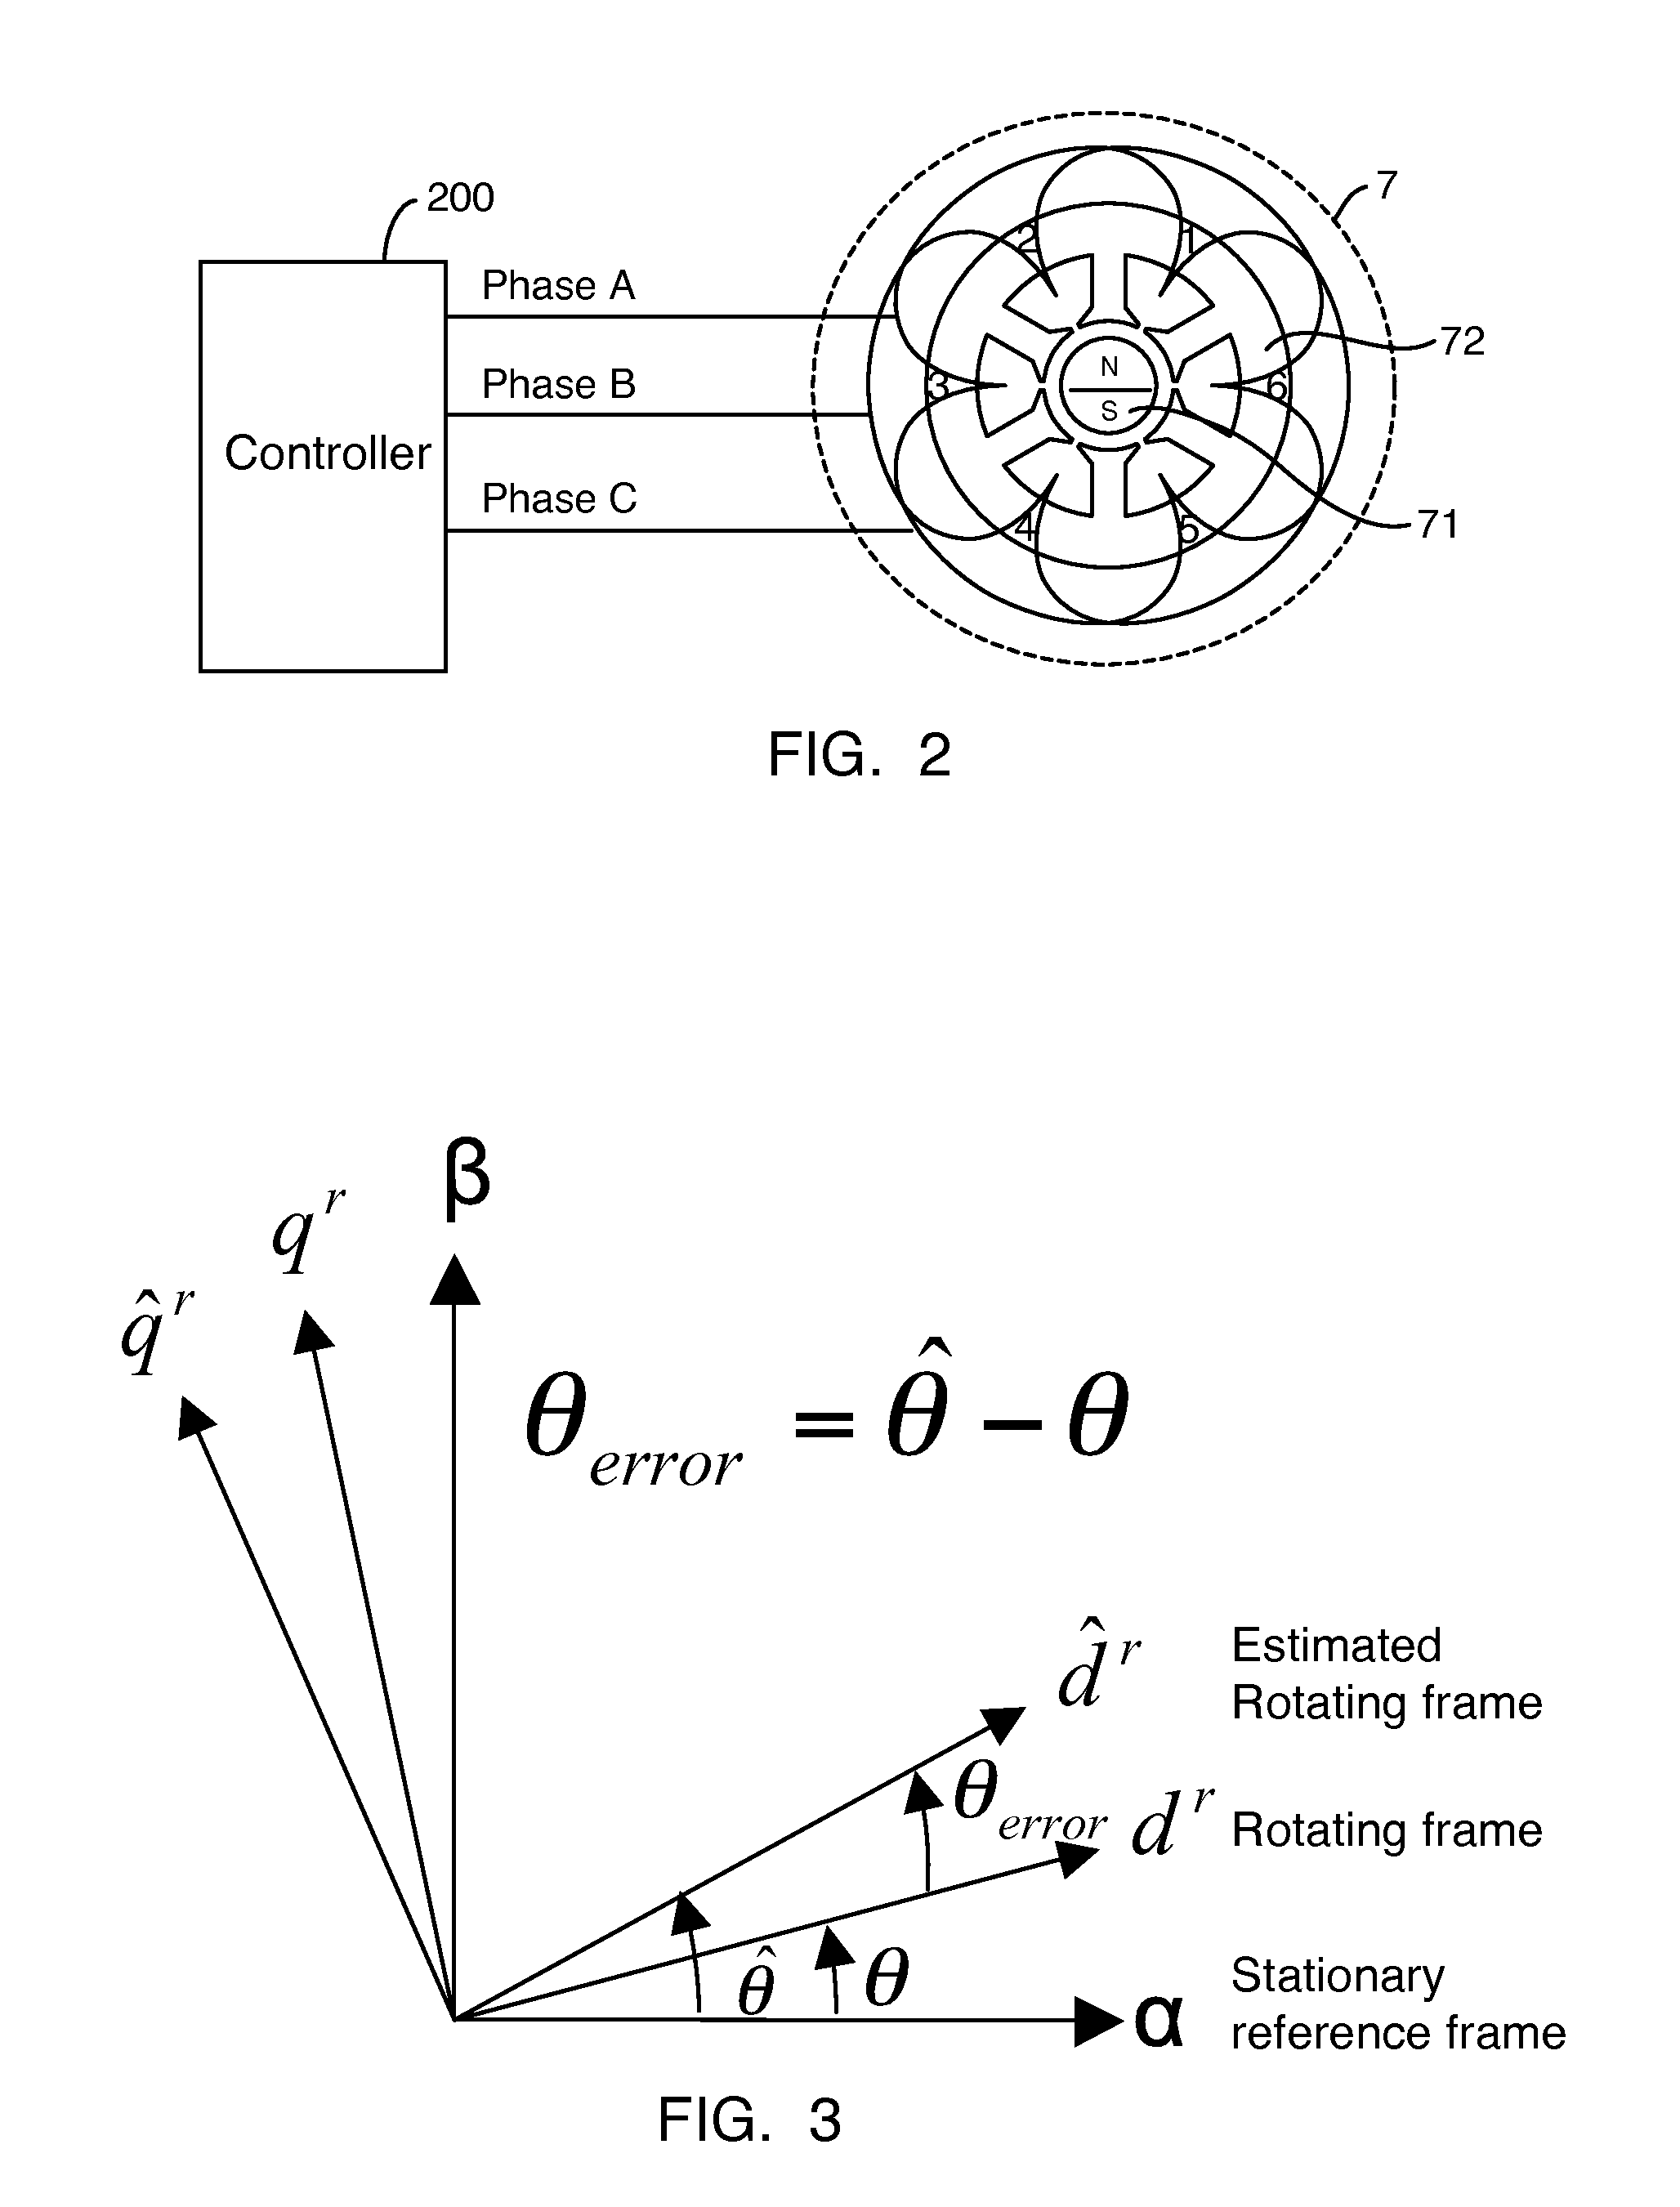 Position-sensorless control system and method of operation for a synchronous motor